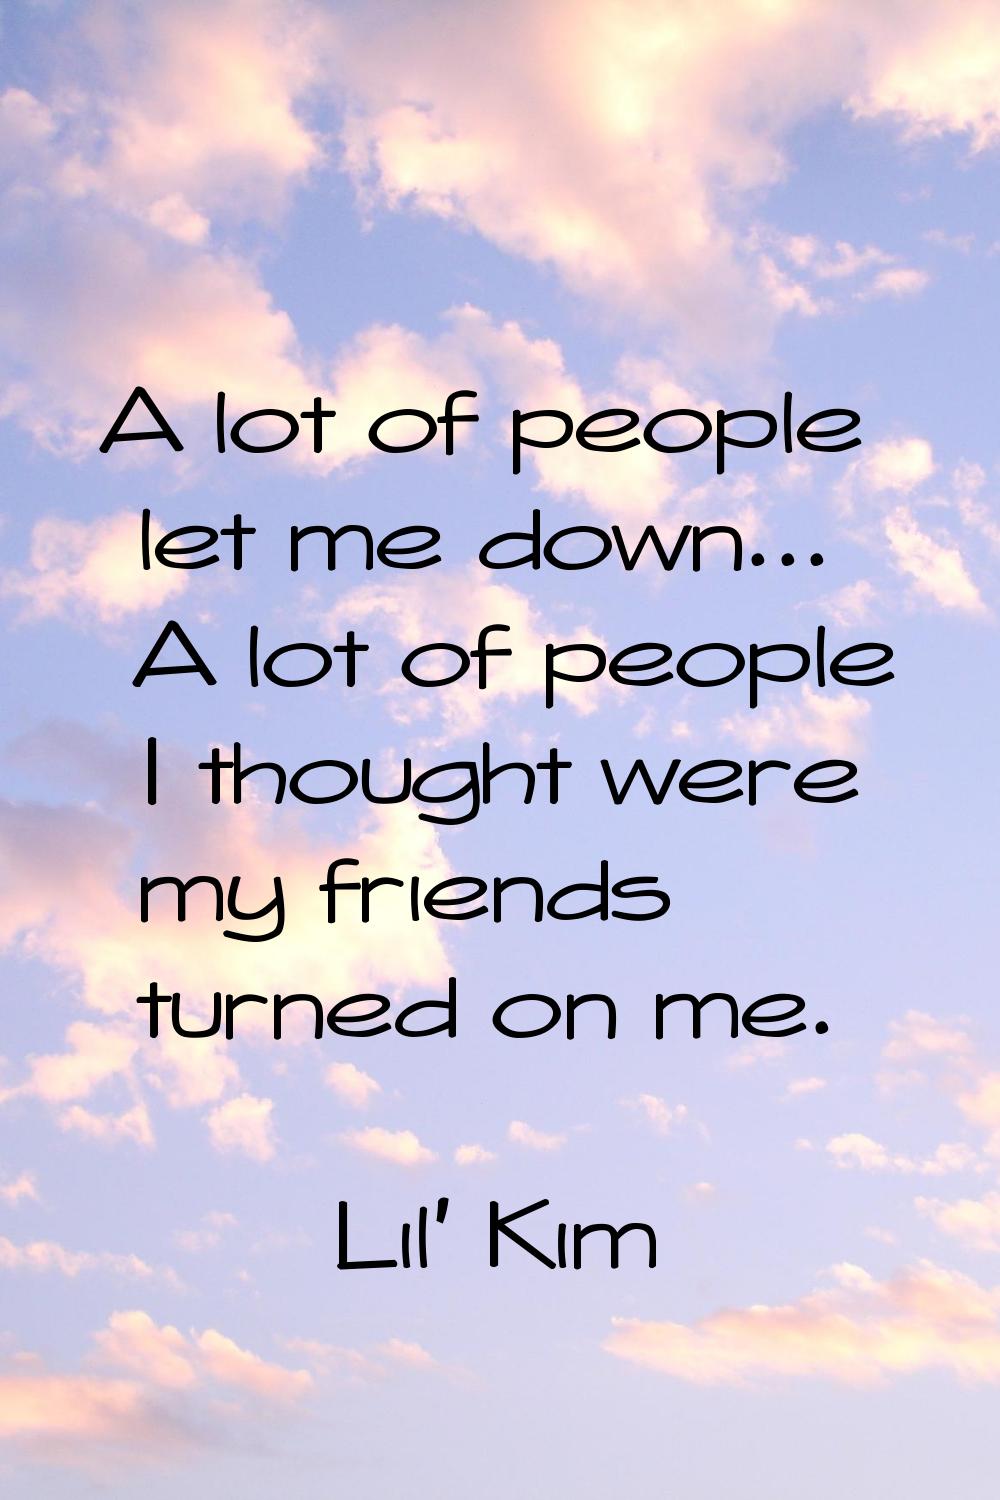 A lot of people let me down... A lot of people I thought were my friends turned on me.